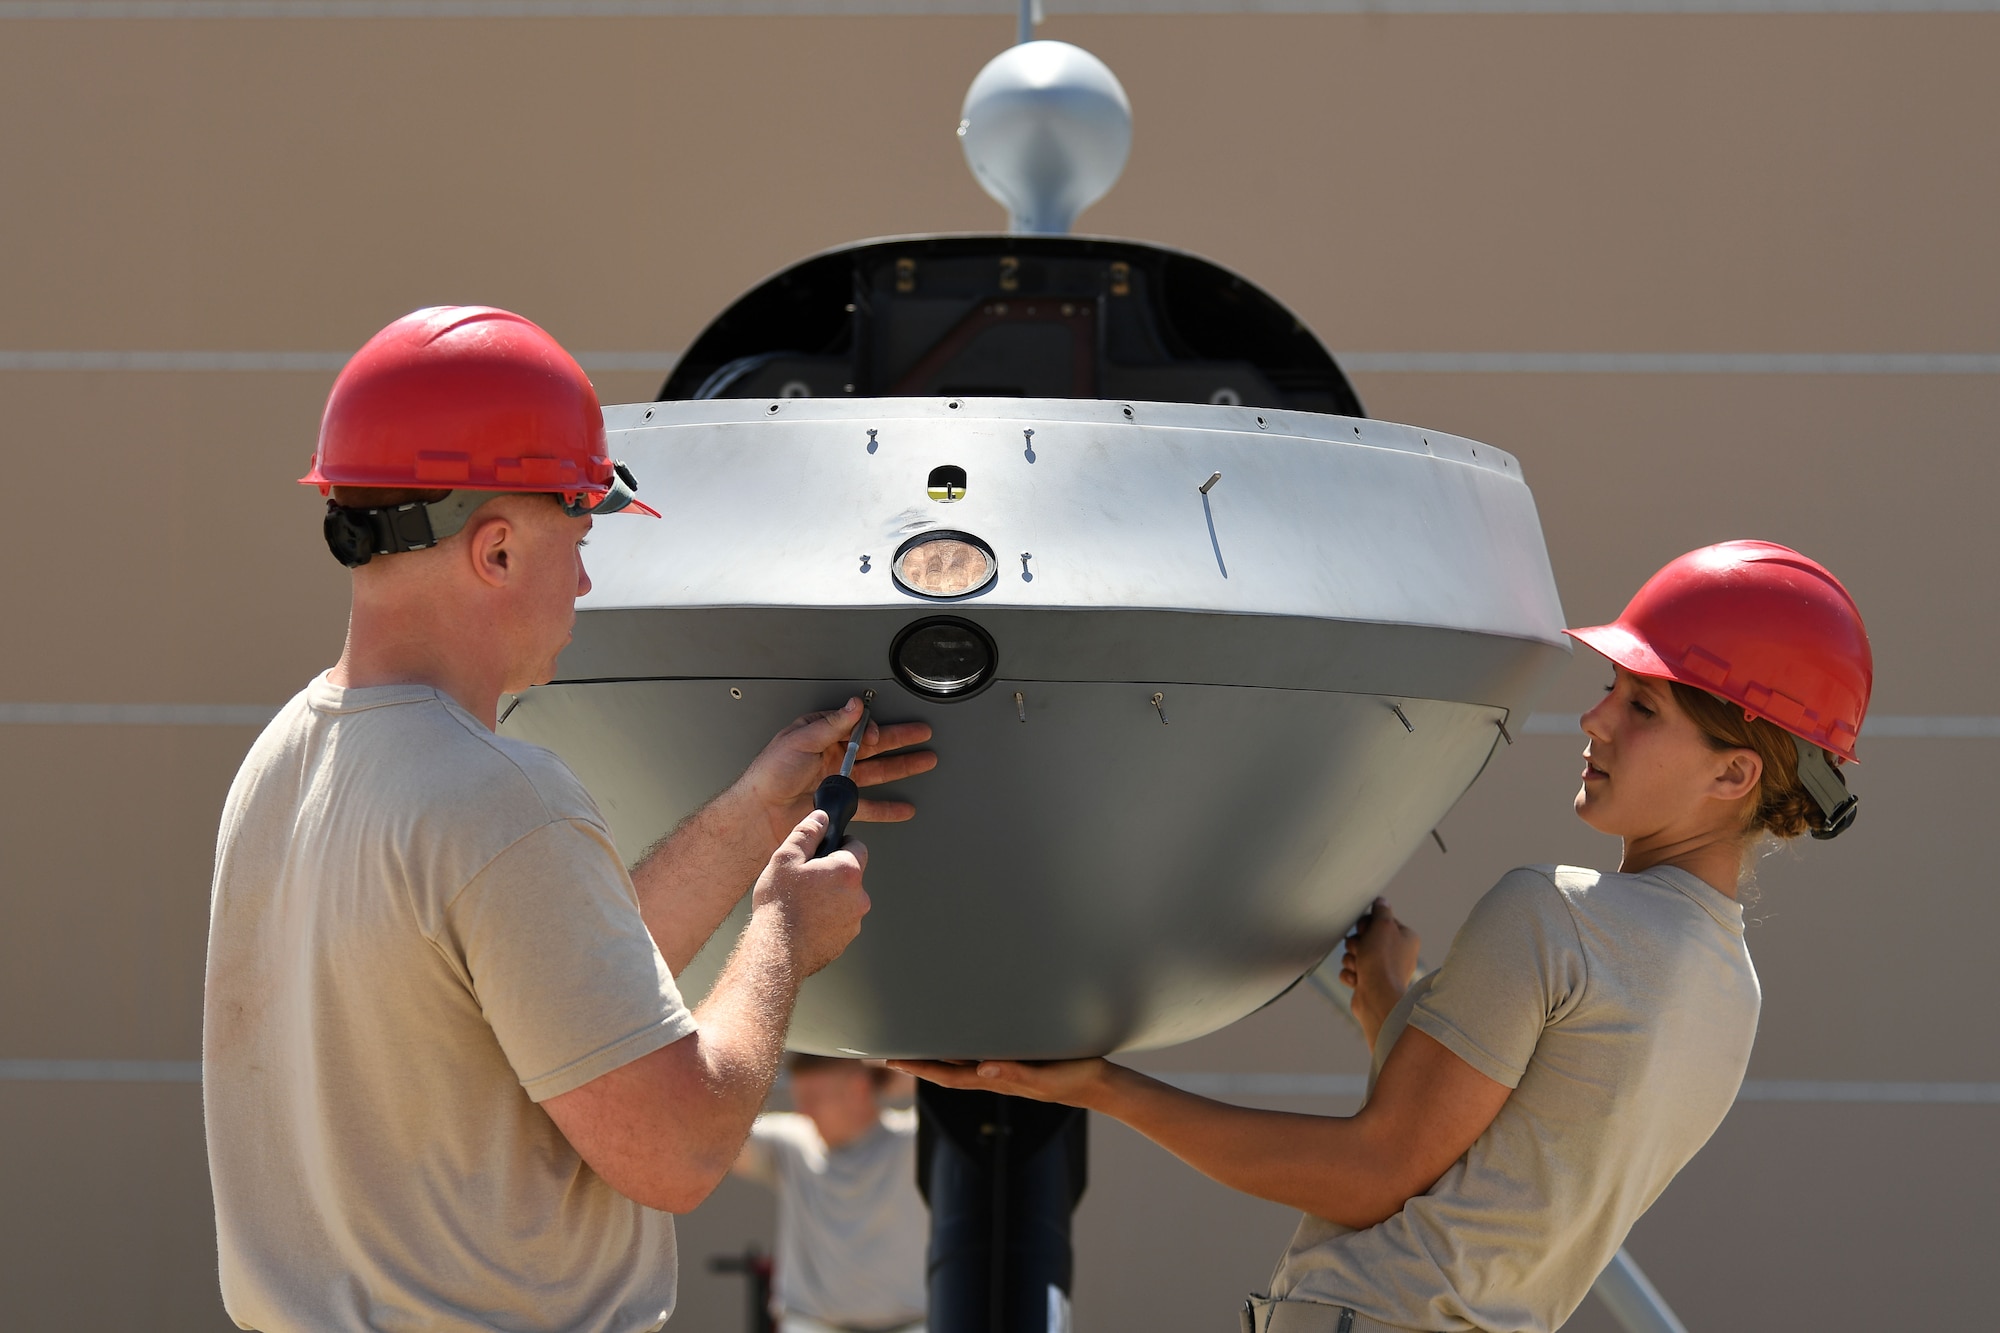 Airmen from the 432nd Aircraft Maintenance Squadron assemble an MQ-9 Reaper model for the 2017 Gulf Coast Salute Open House and Air Show April 21, 2017, at Tyndall Air Force Base, Fla.The airshow marked the first time the MQ-9 model was revealed to the public. (U.S. Air Force photo/Airman 1st Class James Thompson)
